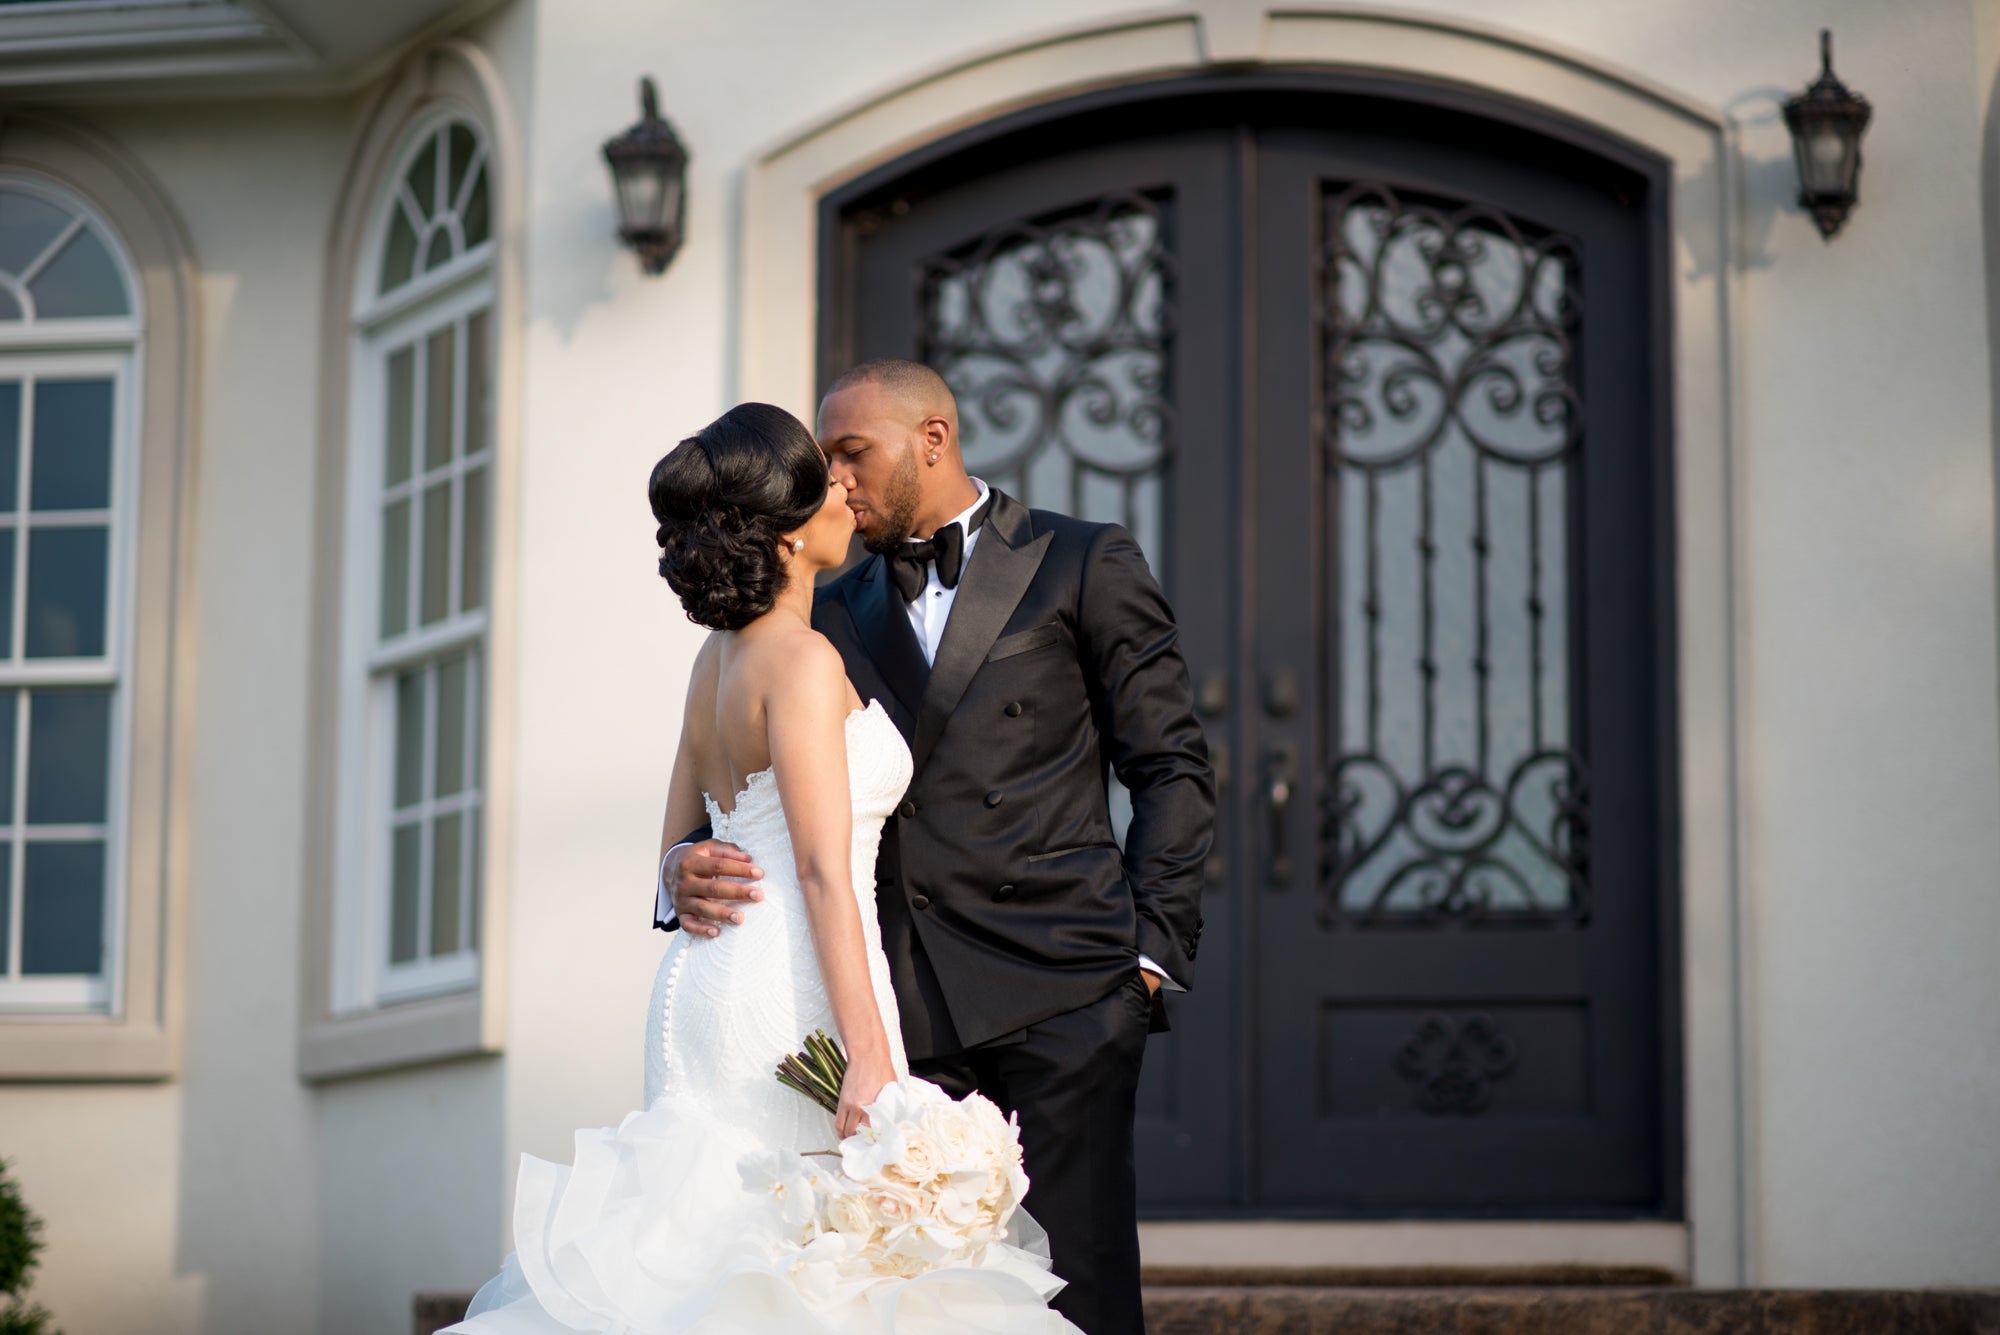 Bridal Bliss: Terrell And Grace's Gorgeous Vineyard Wedding Stole Our Hearts